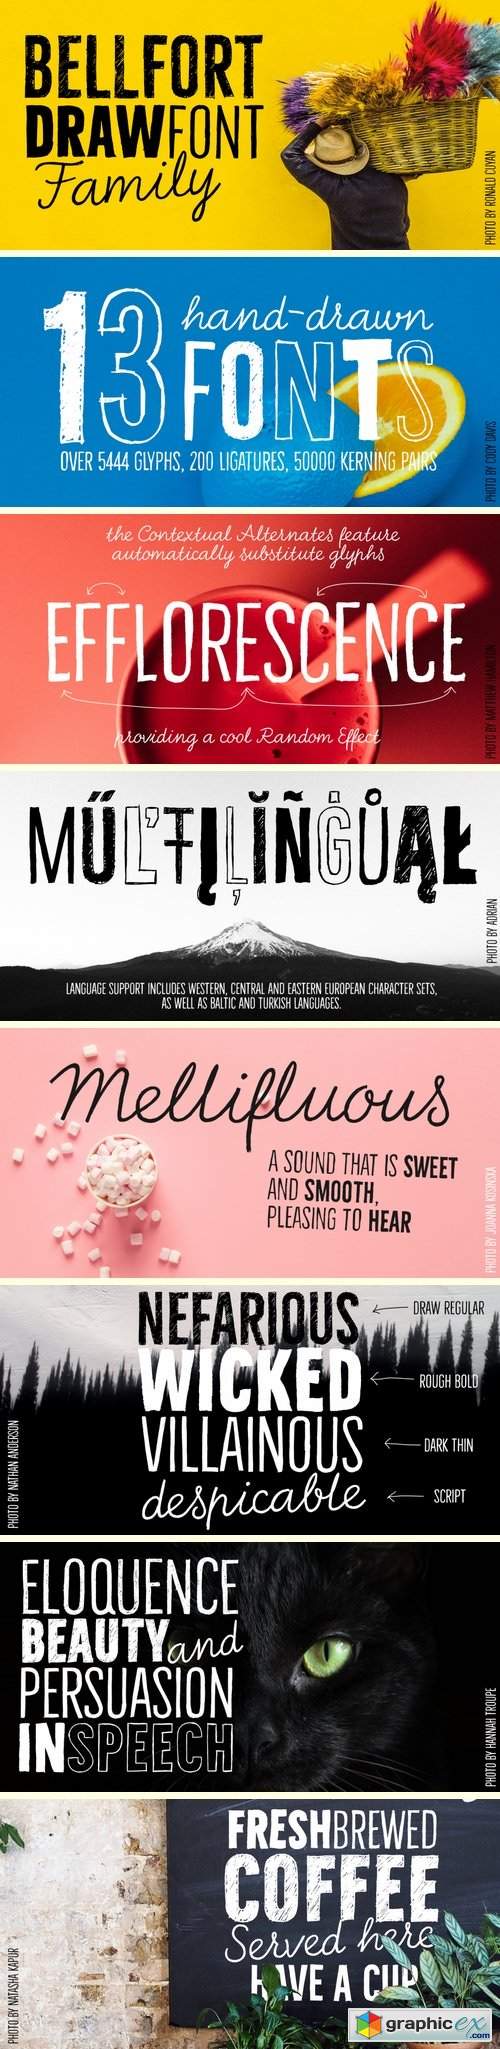 Bellfort Draw Font Family - 13 Fonts